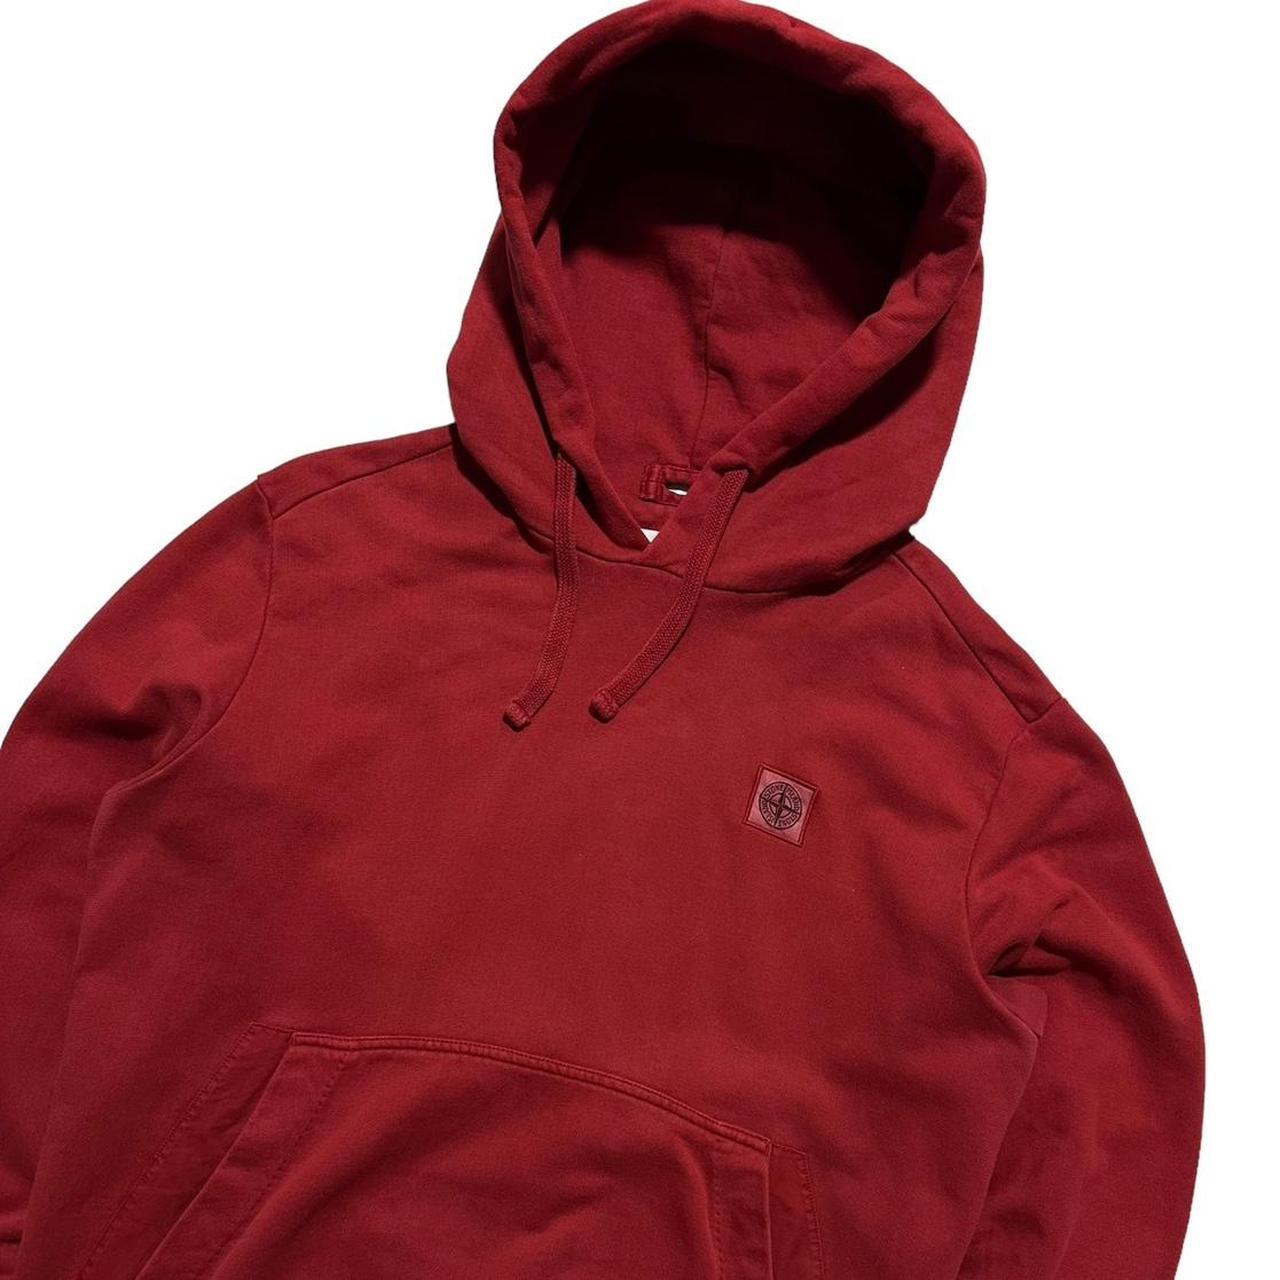 Stone Island Red Pullover Hoodie - Known Source